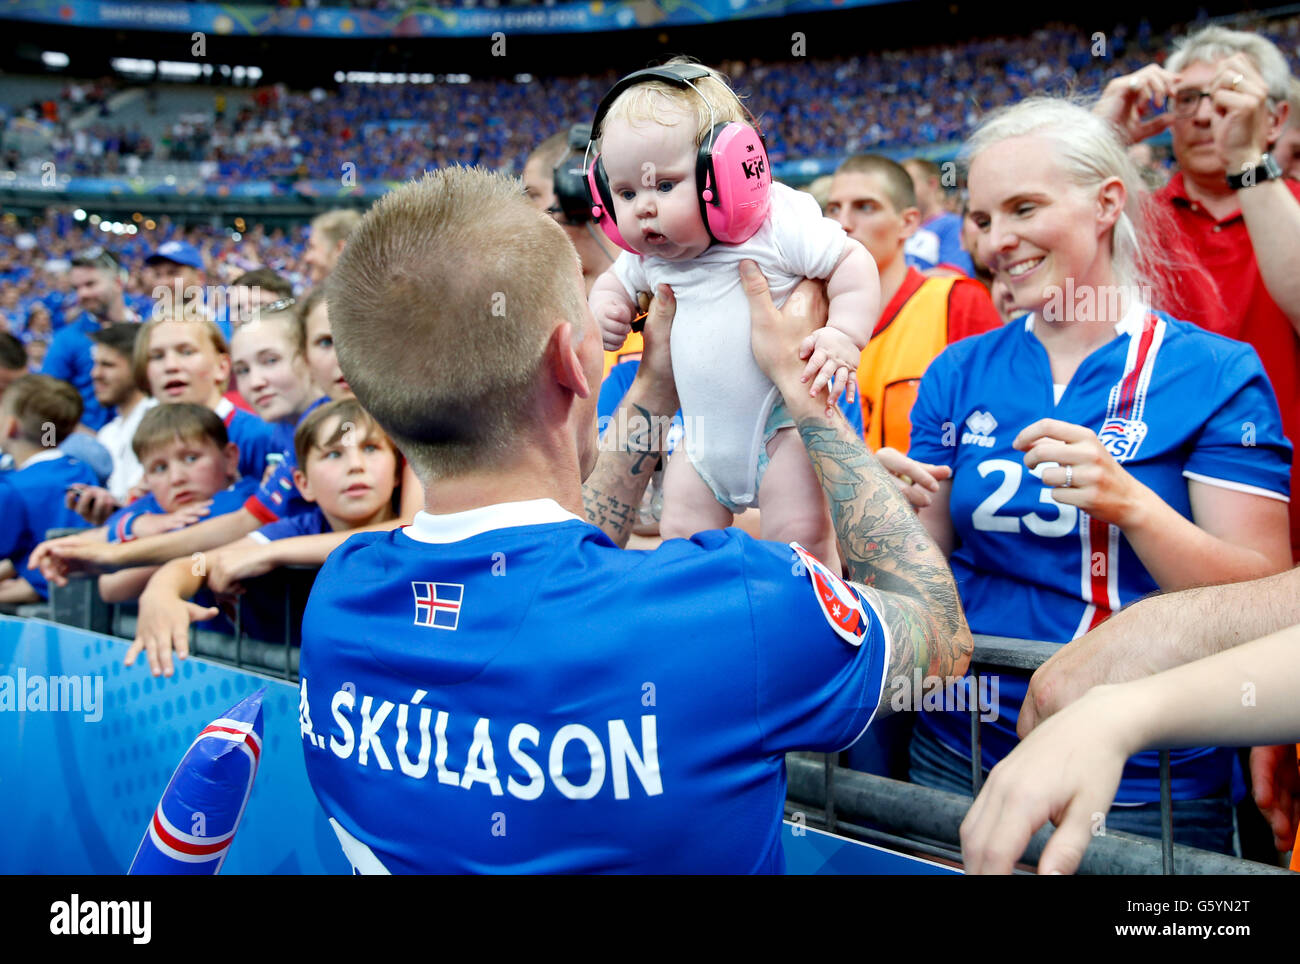 Iceland's Ari Freyr Skulason holds a baby from the crowd as he celebrates qualifying for the last 16 round after the Euro 2016, Group F match at the Stade de France, Paris. after qualifying for the last 16 round after the Euro 2016, Group F match at the Stade de France, Paris. PRESS ASSOCIATION Photo. Picture date: Wednesday June 22, 2016. See PA story SOCCER Iceland. Photo credit should read: Owen Humphreys/PA Wire. RESTRICTIONS: Use subject to restrictions. . Book and magazine sales permitted providing not solely devoted to any one team/player/match. No commercial use. Call +44 (0)1158 Stock Photo